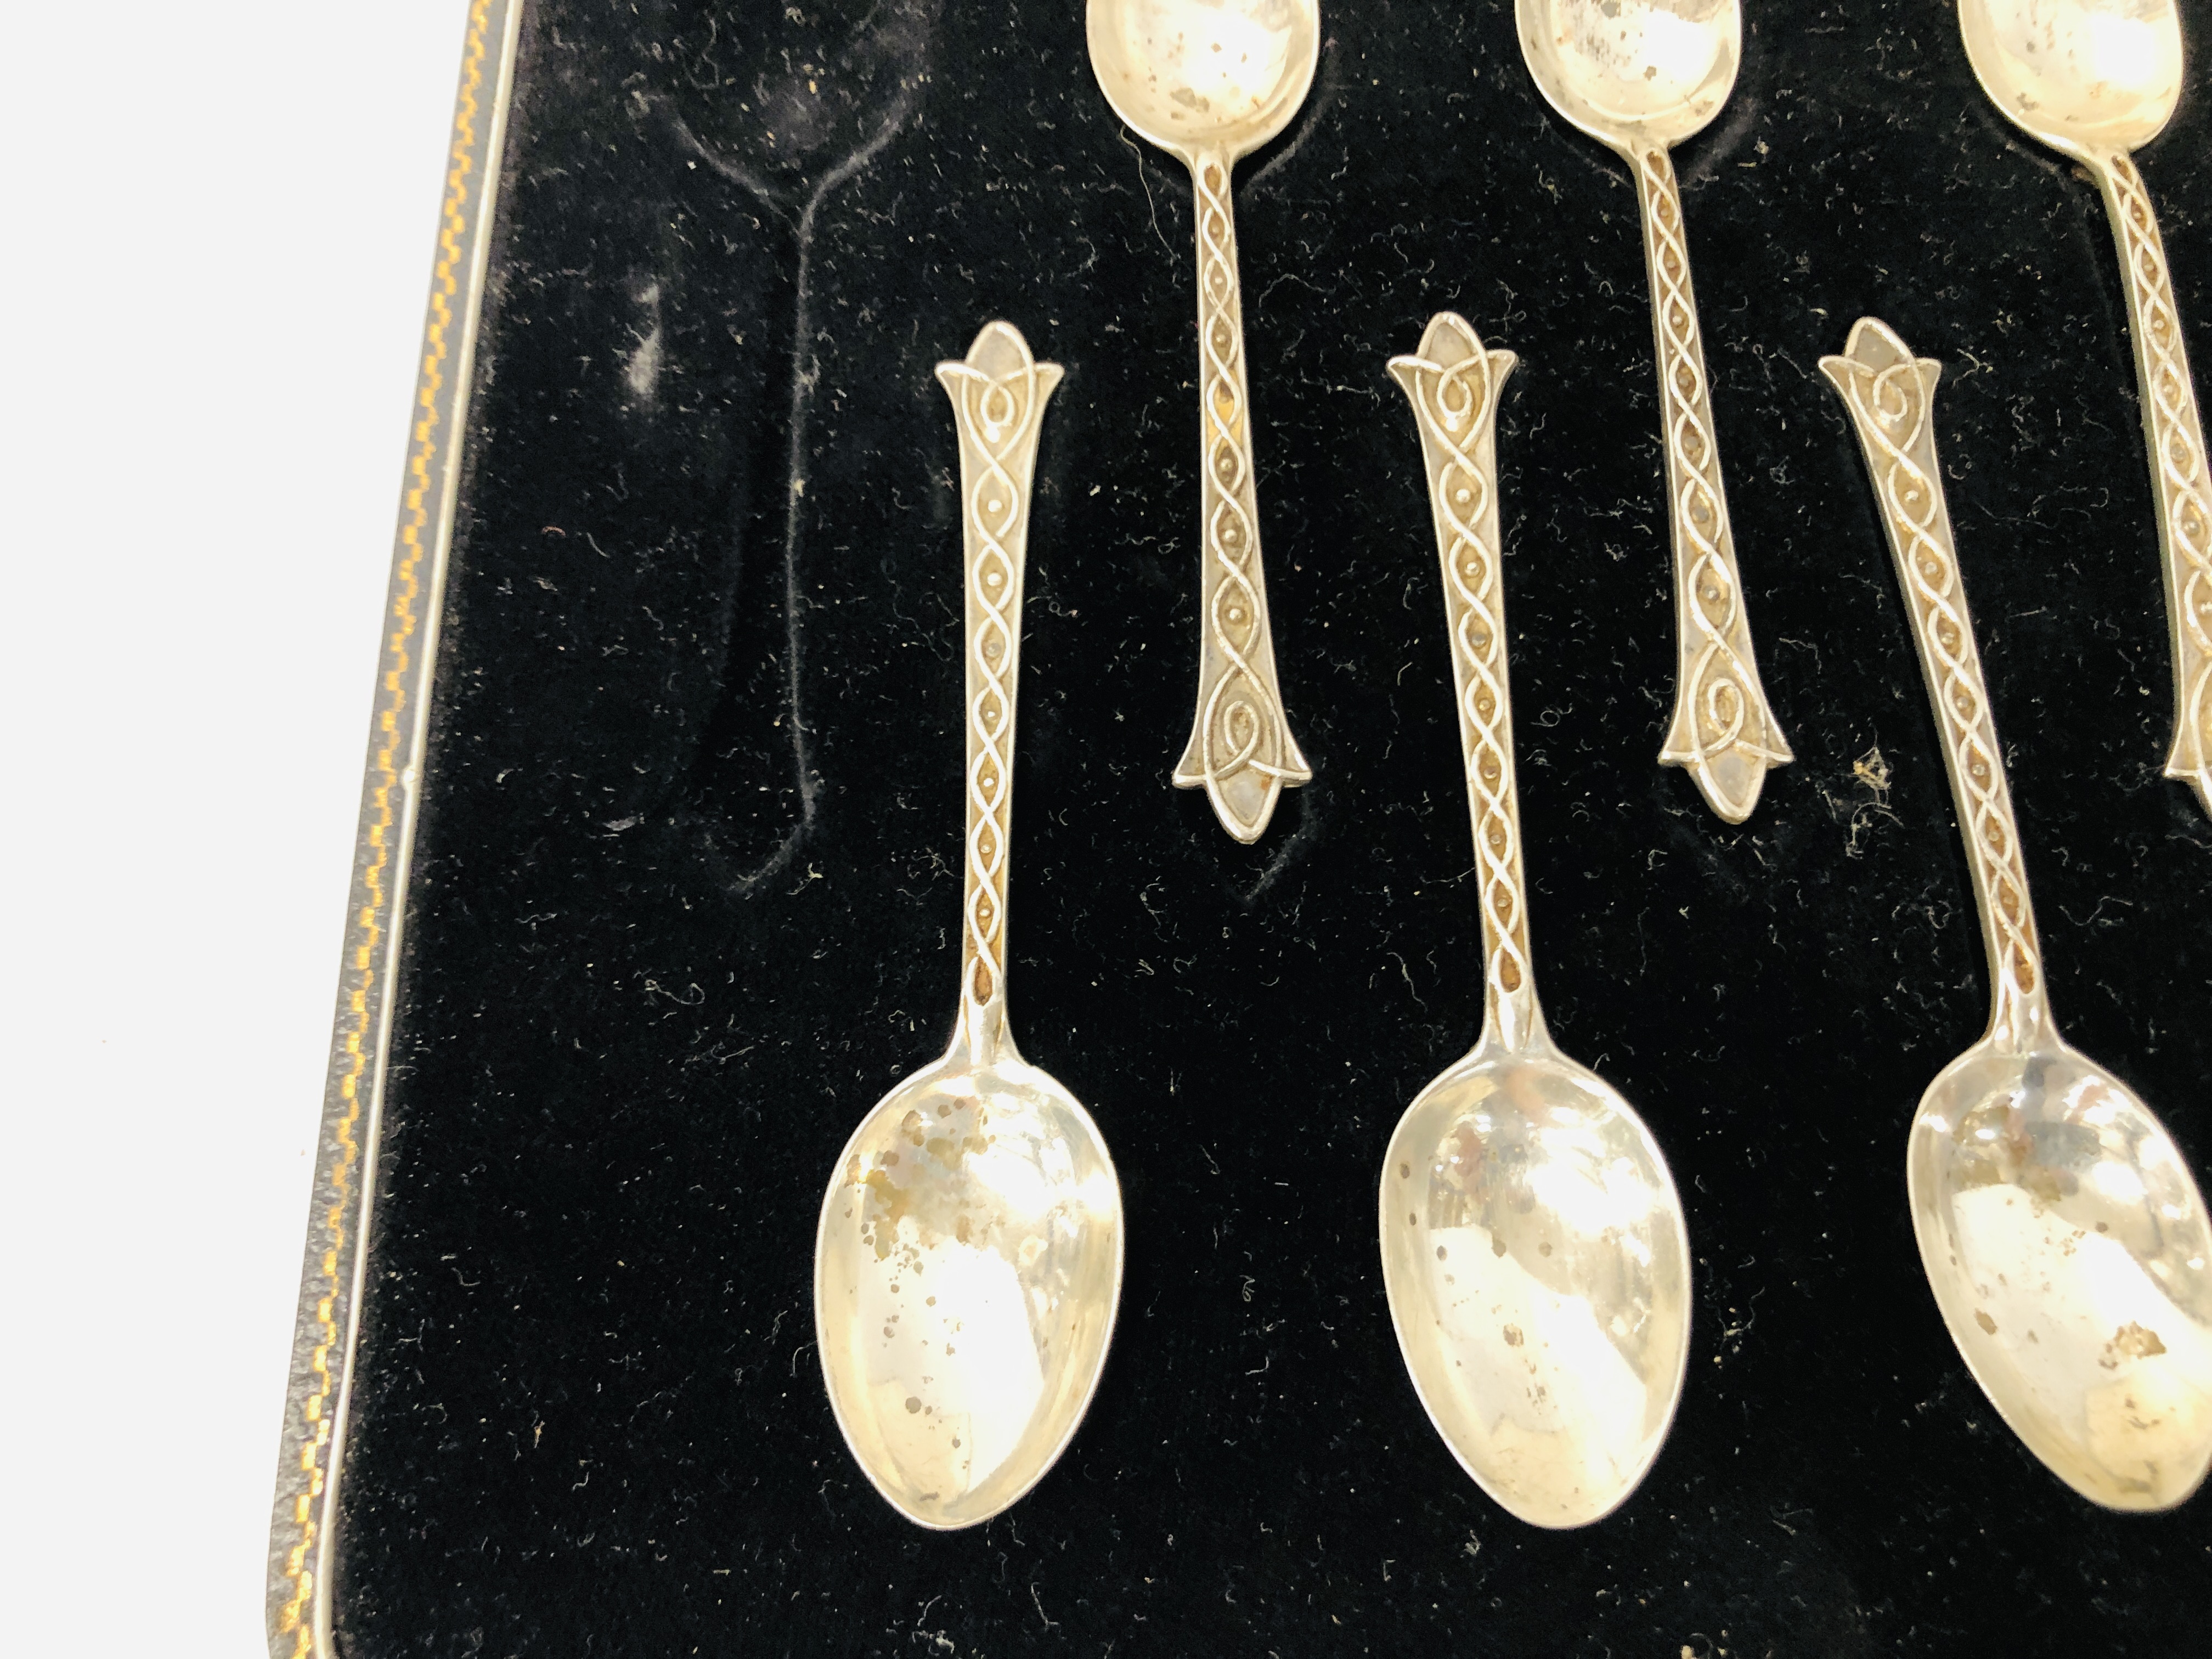 A CASE CONTAINING ELEVEN SILVER TEASPOONS STAMPED C.E. - Image 3 of 5